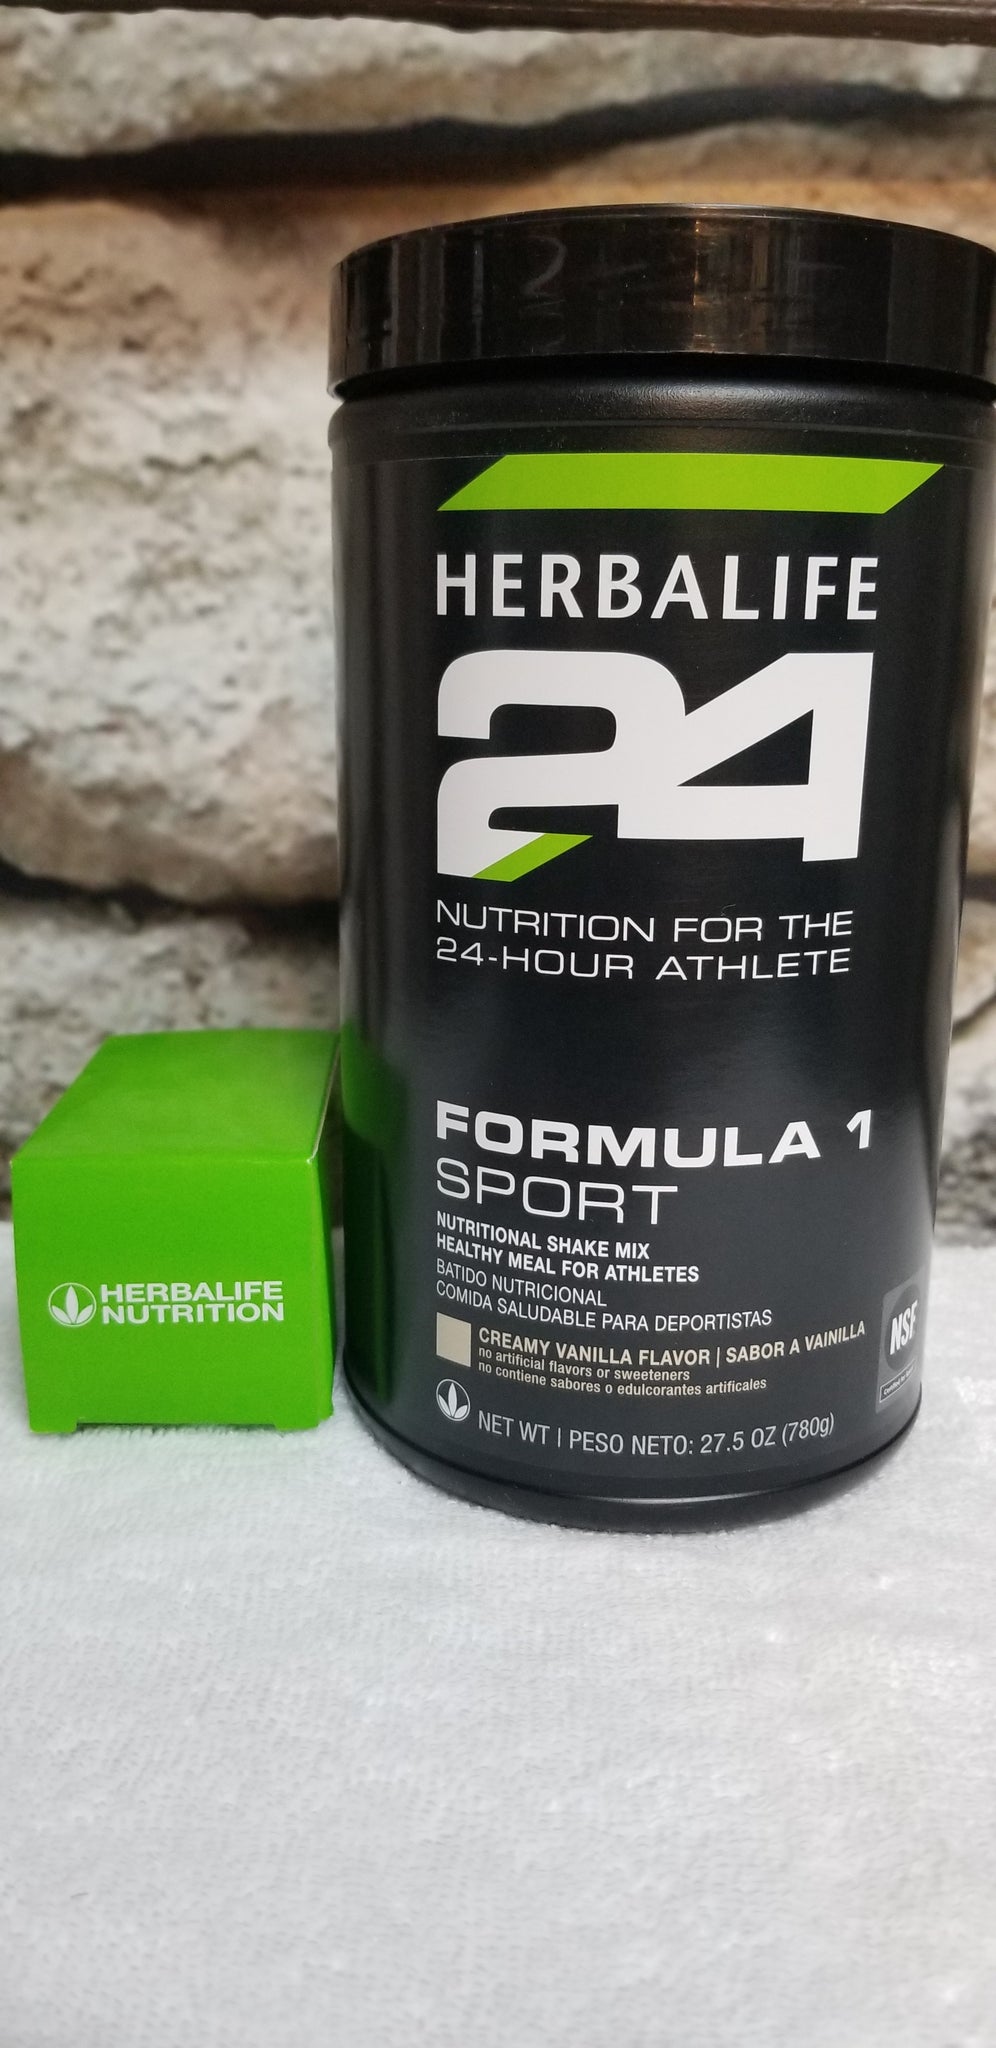 HERBALIFE 24 Formula 1 Sport - Nutrition for the 24 hour athlete - 27.5 oz